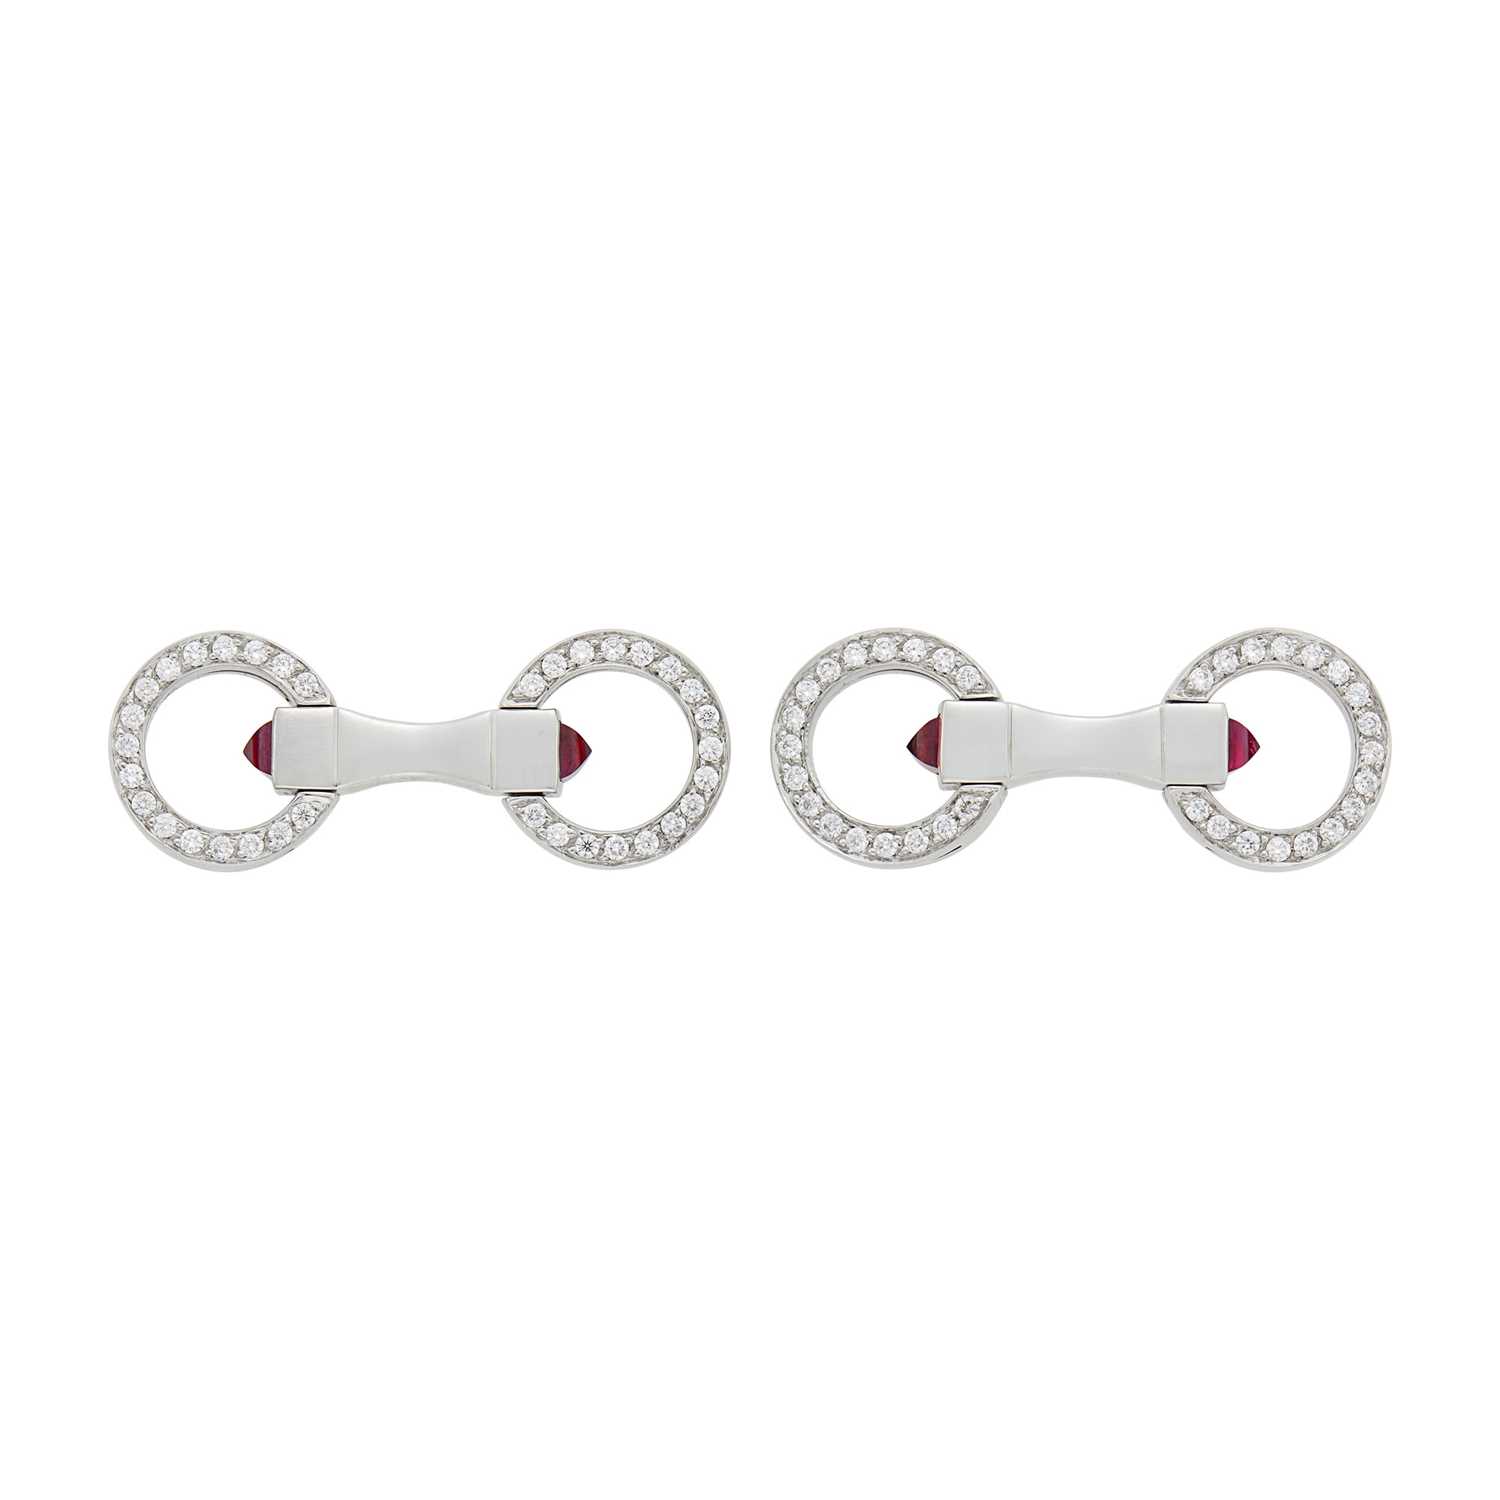 Lot 142 - Pair of Platinum, Diamond and Ruby Double-Sided Cufflinks